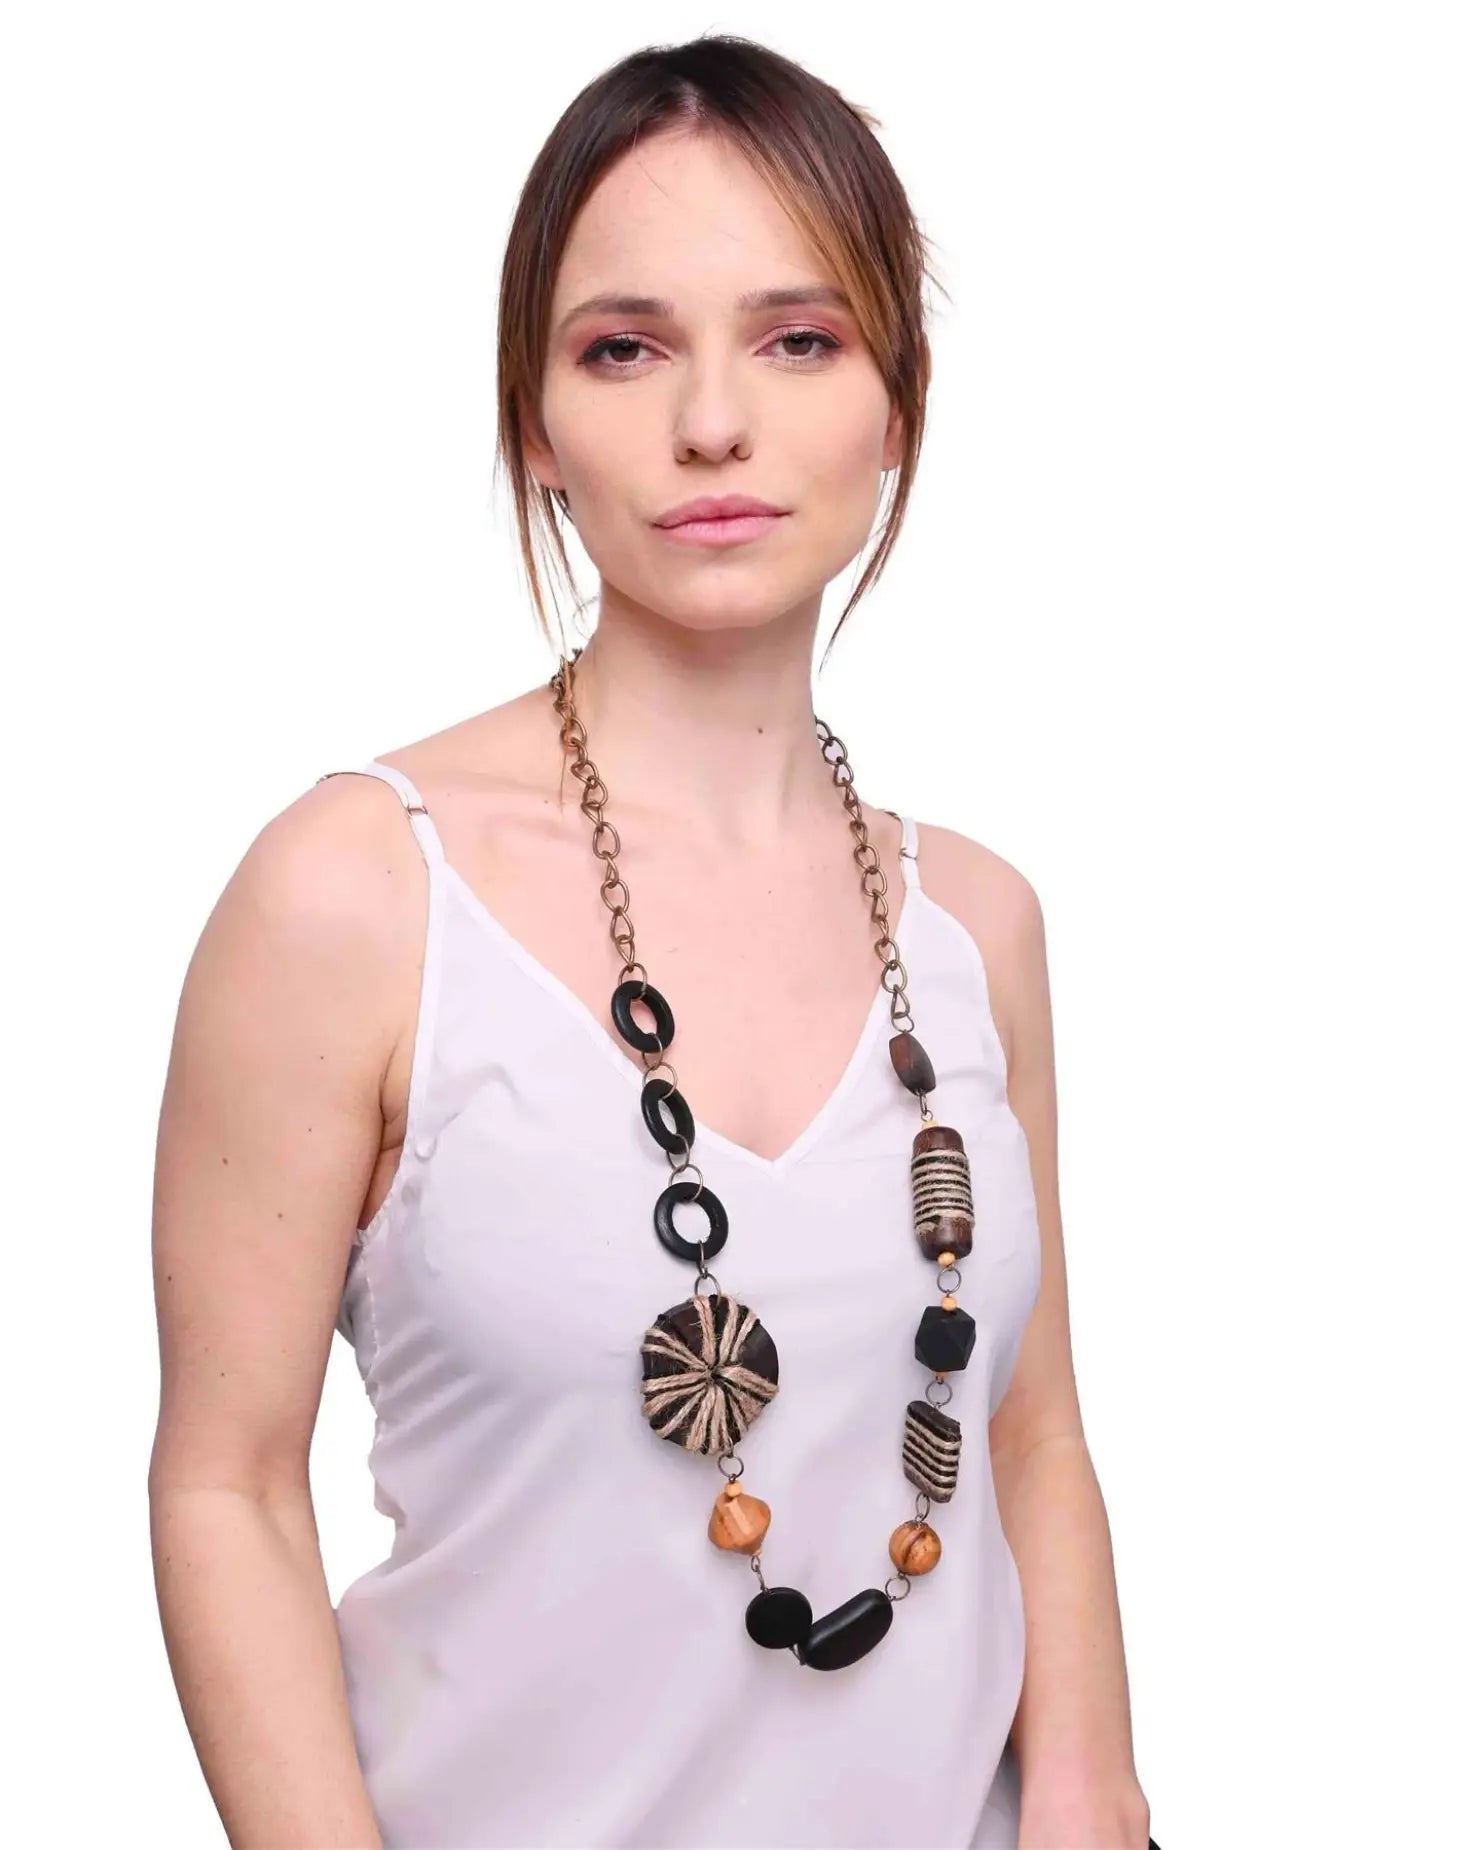 Art Patterned Wooden Beads Long Necklace with Woman wearing Black and White Design.